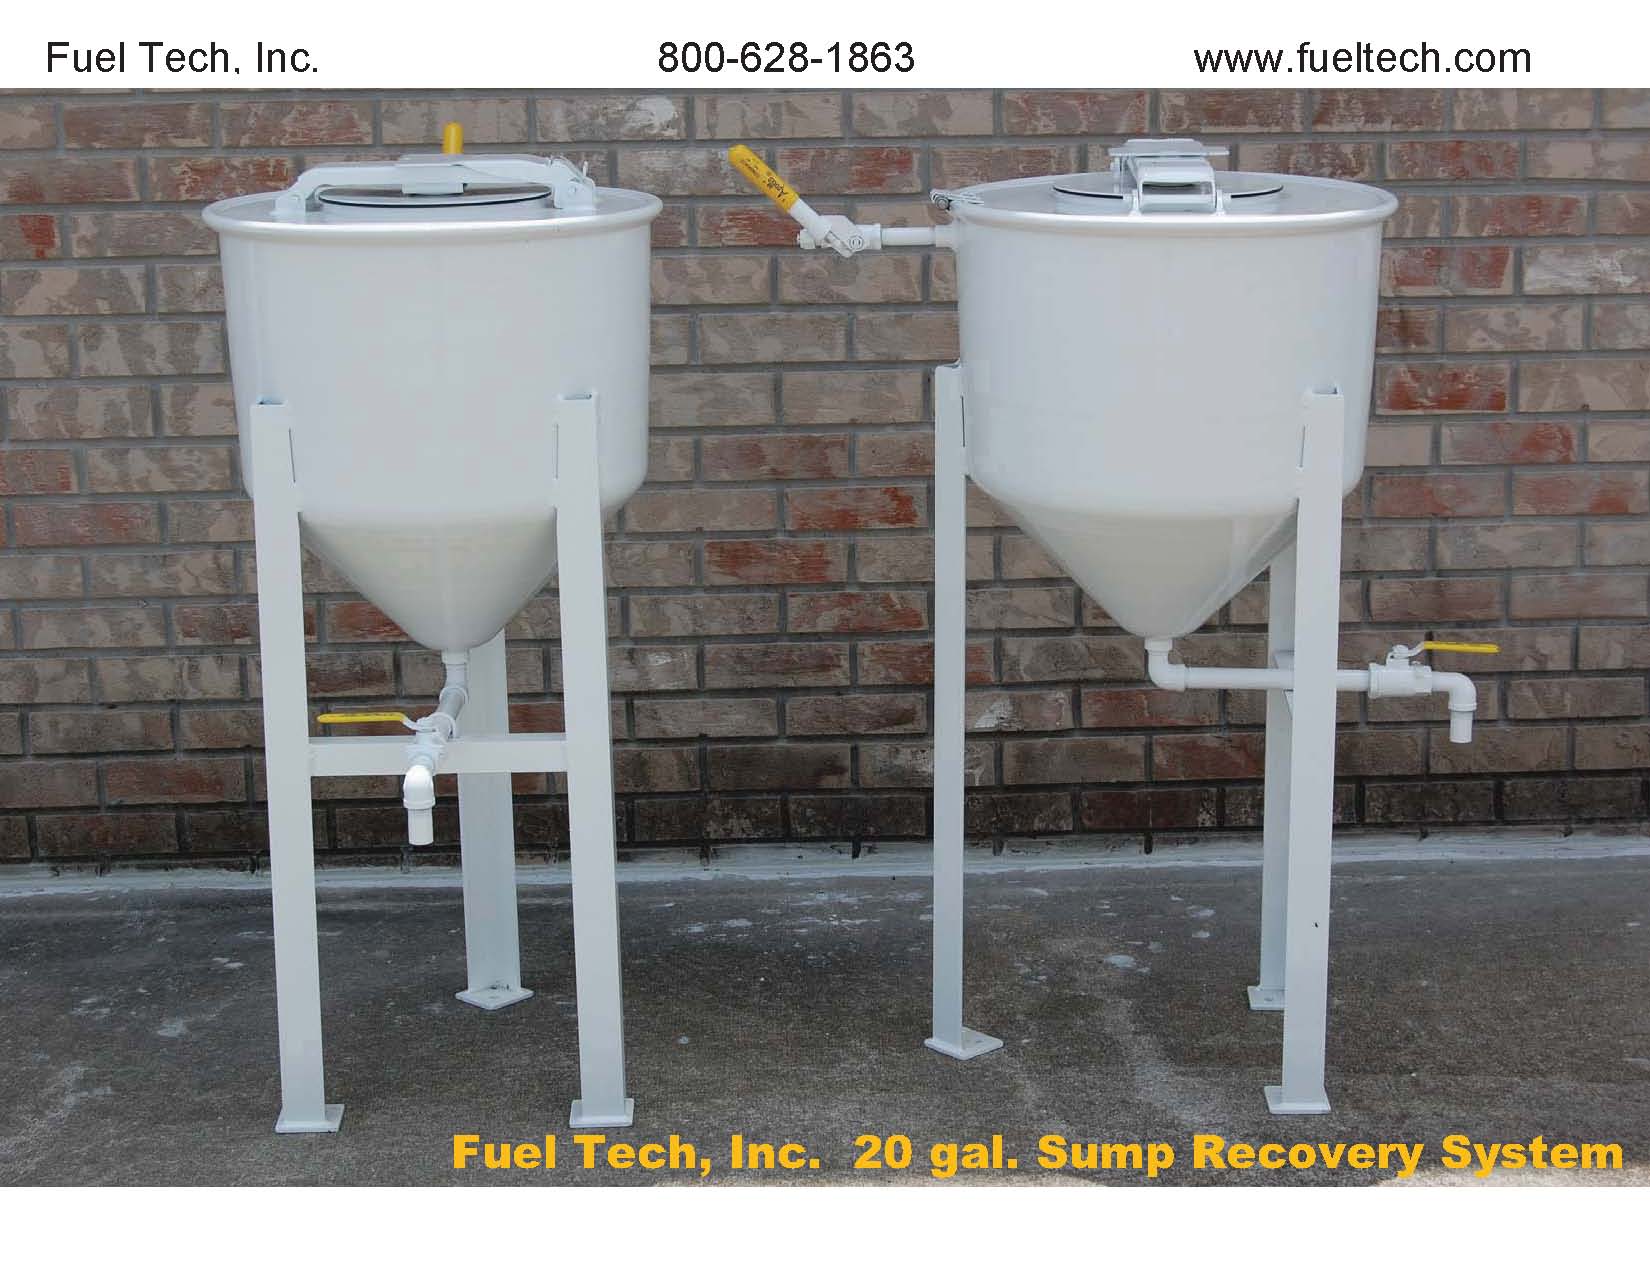 20-Gal.-Sump-Recovery-Unit-Brochure-2013_Page_4.jpg